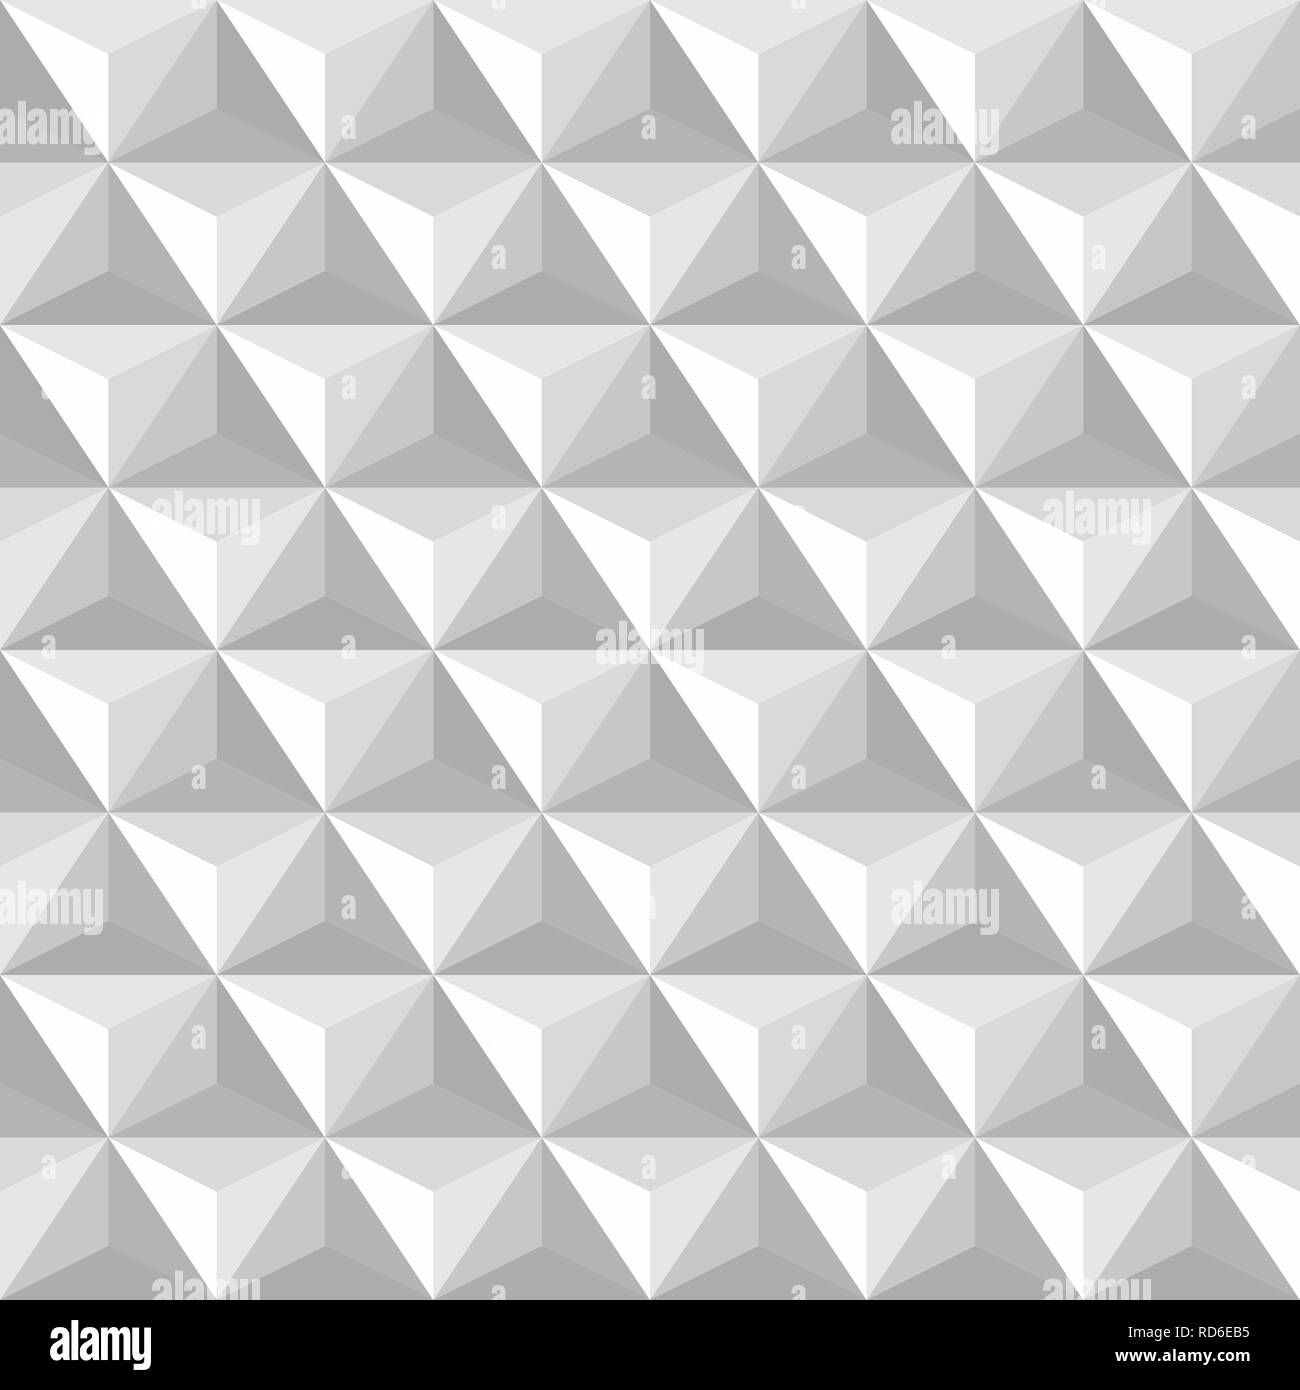 https://c8.alamy.com/comp/RD6EB5/abstract-triangle-background-white-and-grey-geometric-texture-seamless-triangles-pattern-structured-background-vector-illustration-RD6EB5.jpg